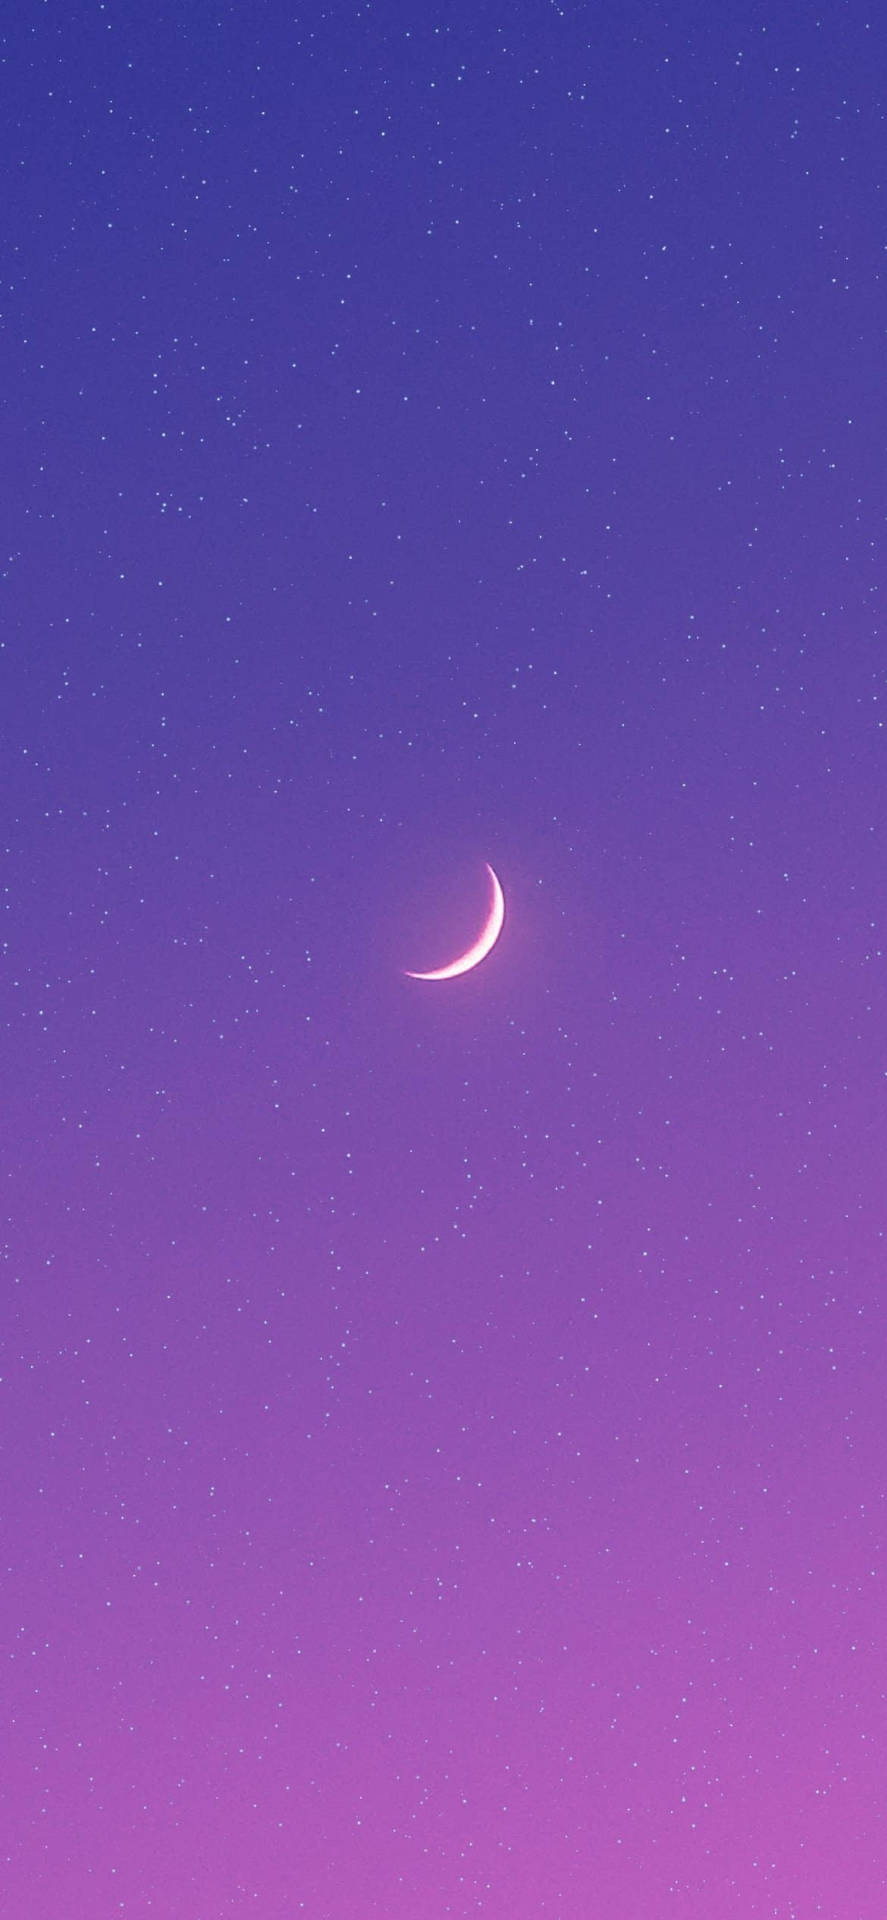 Free Photo  Pink sky background with crescent moon